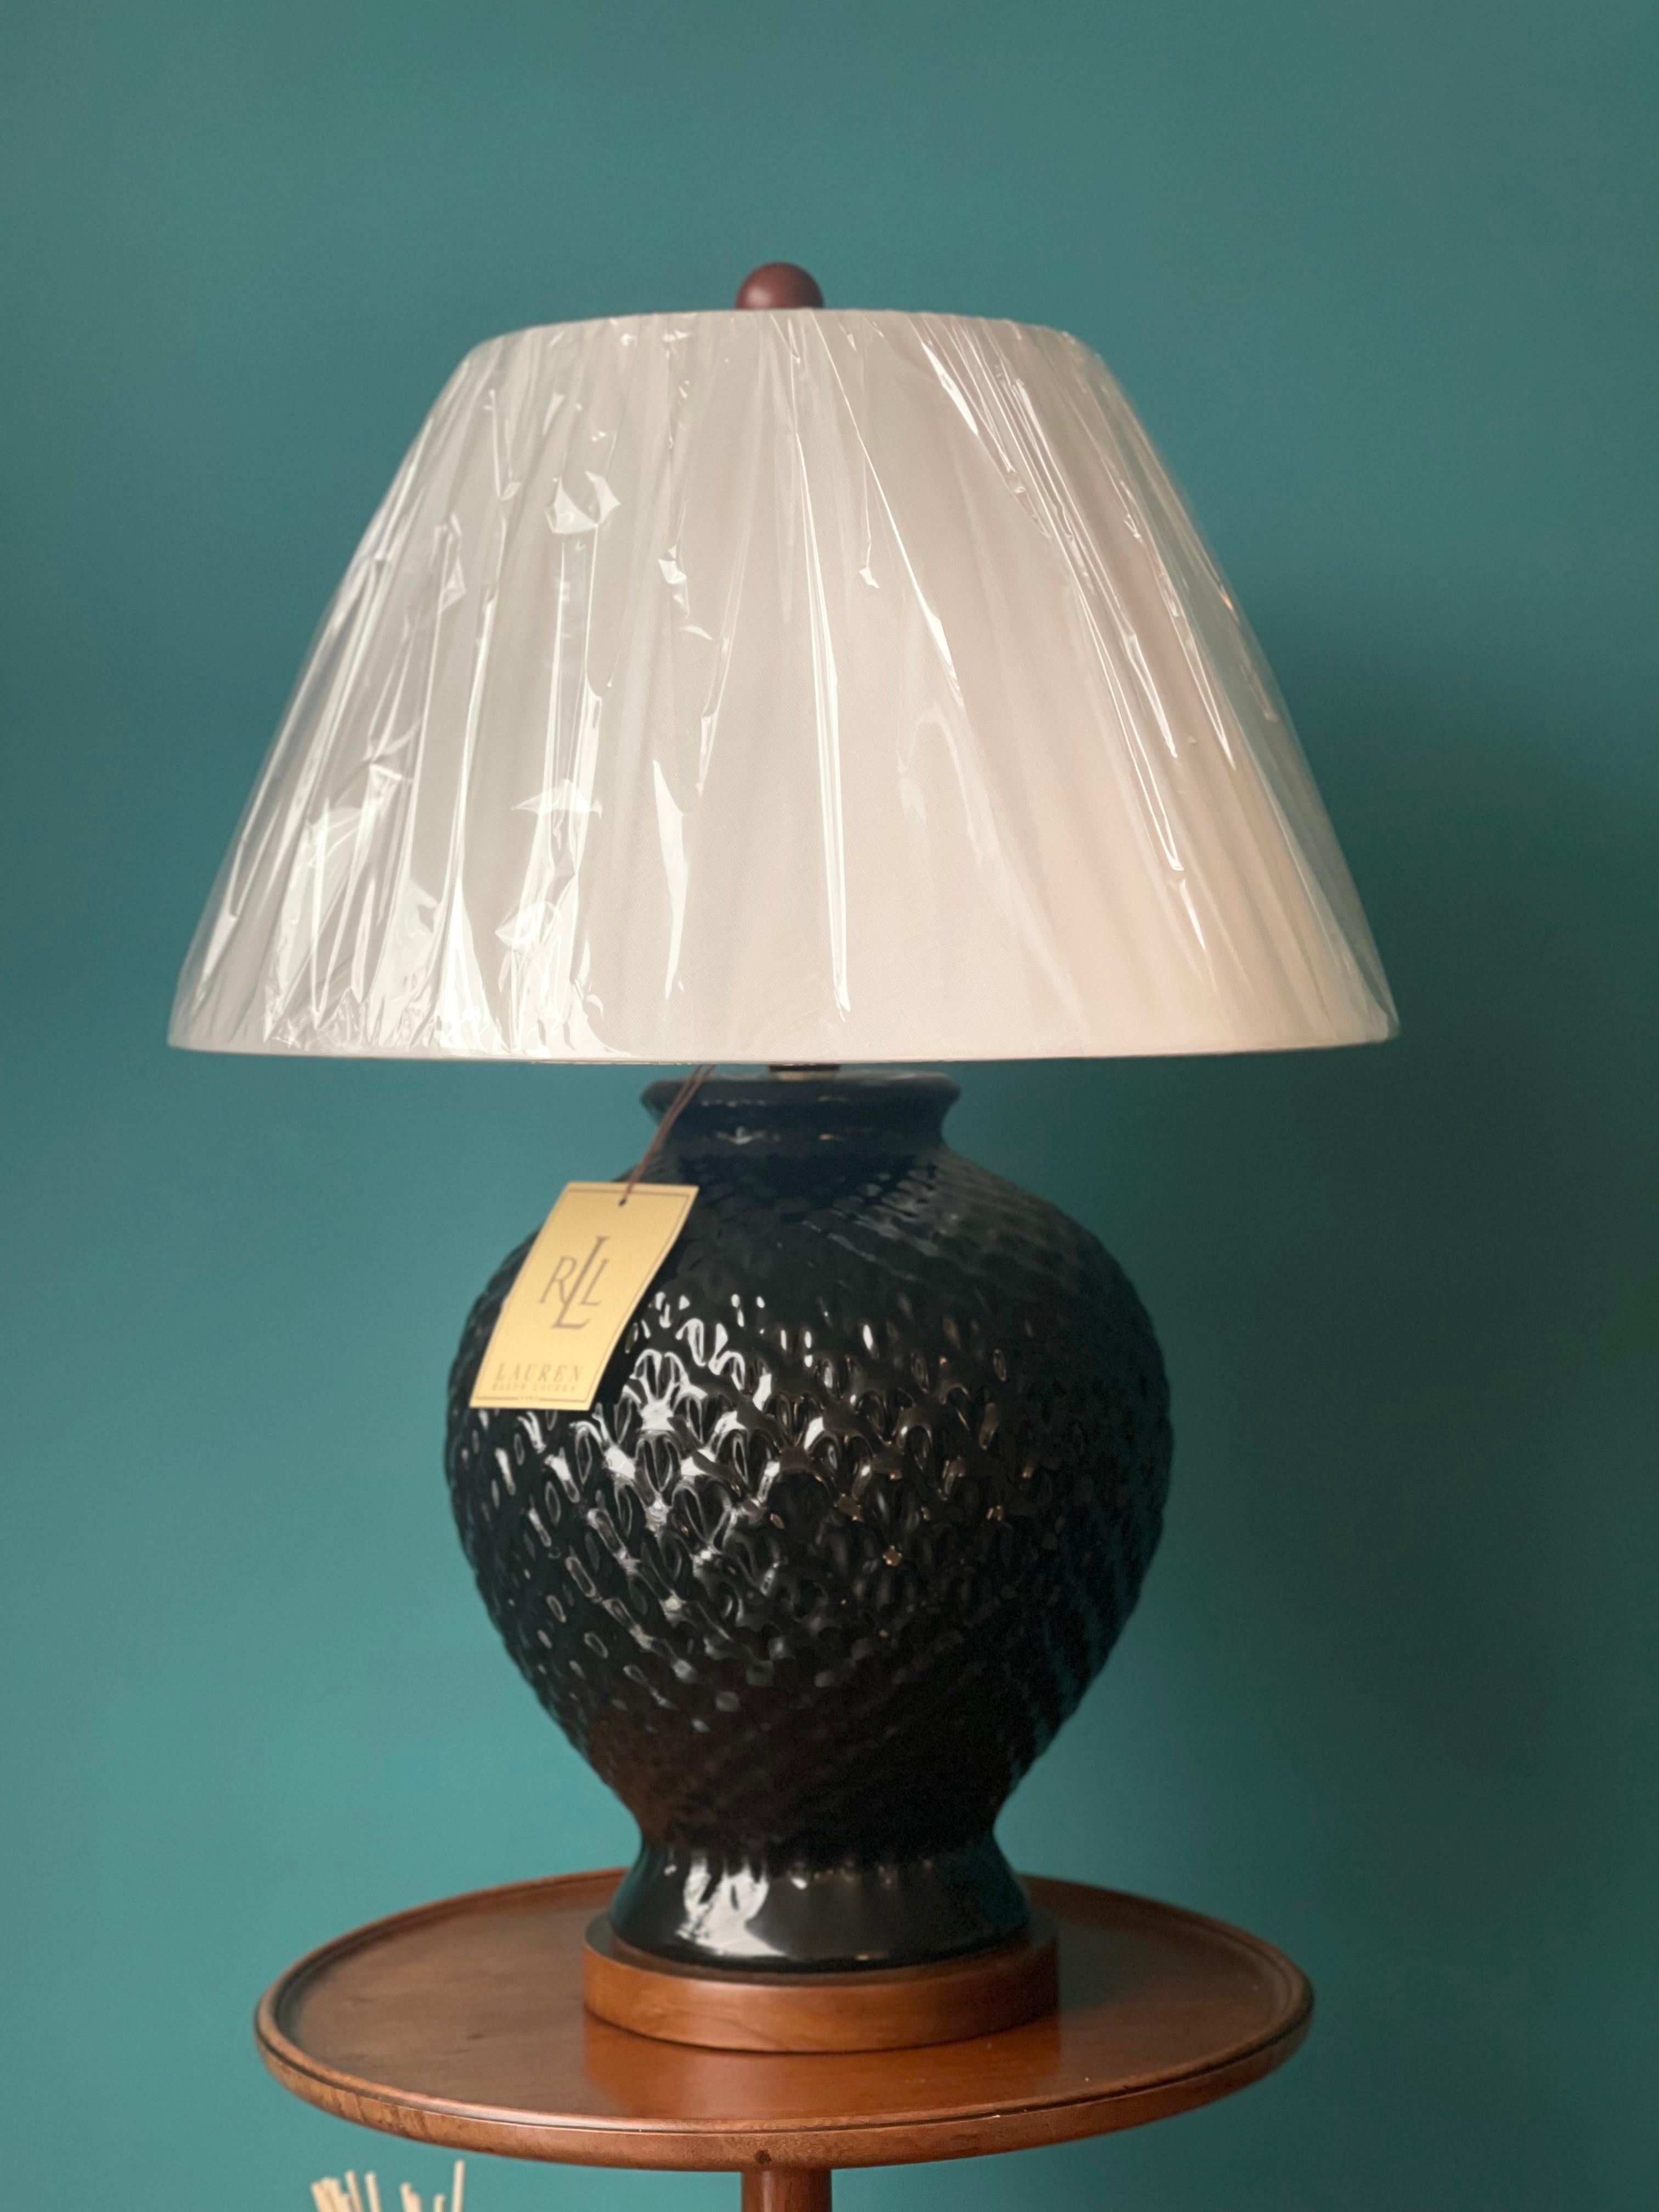 We are delighted to offer for sale this stunning brand new Ralph Lauren porcelain lamp with original shade.

They have the Lauren brass plate around the base and have height adjustable shades and inline cable switches. 

Please note all lamps